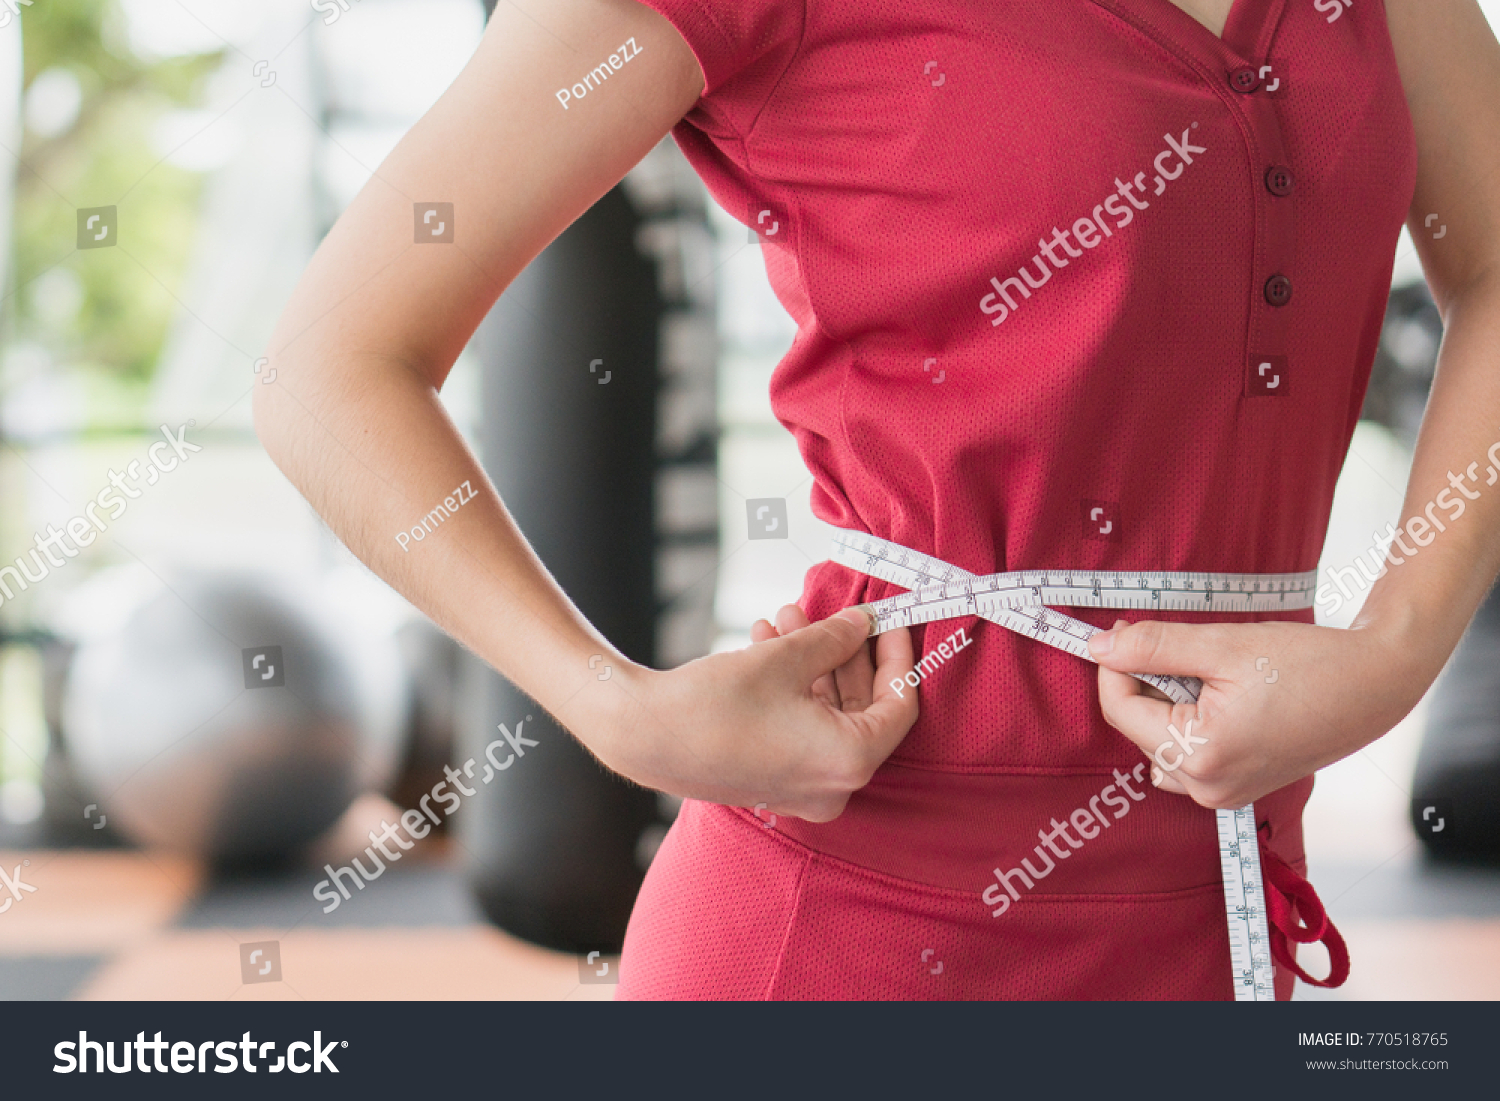 Young slim woman measuring her waist by measure tape after a diet with accessory in sporty gym as background. #770518765